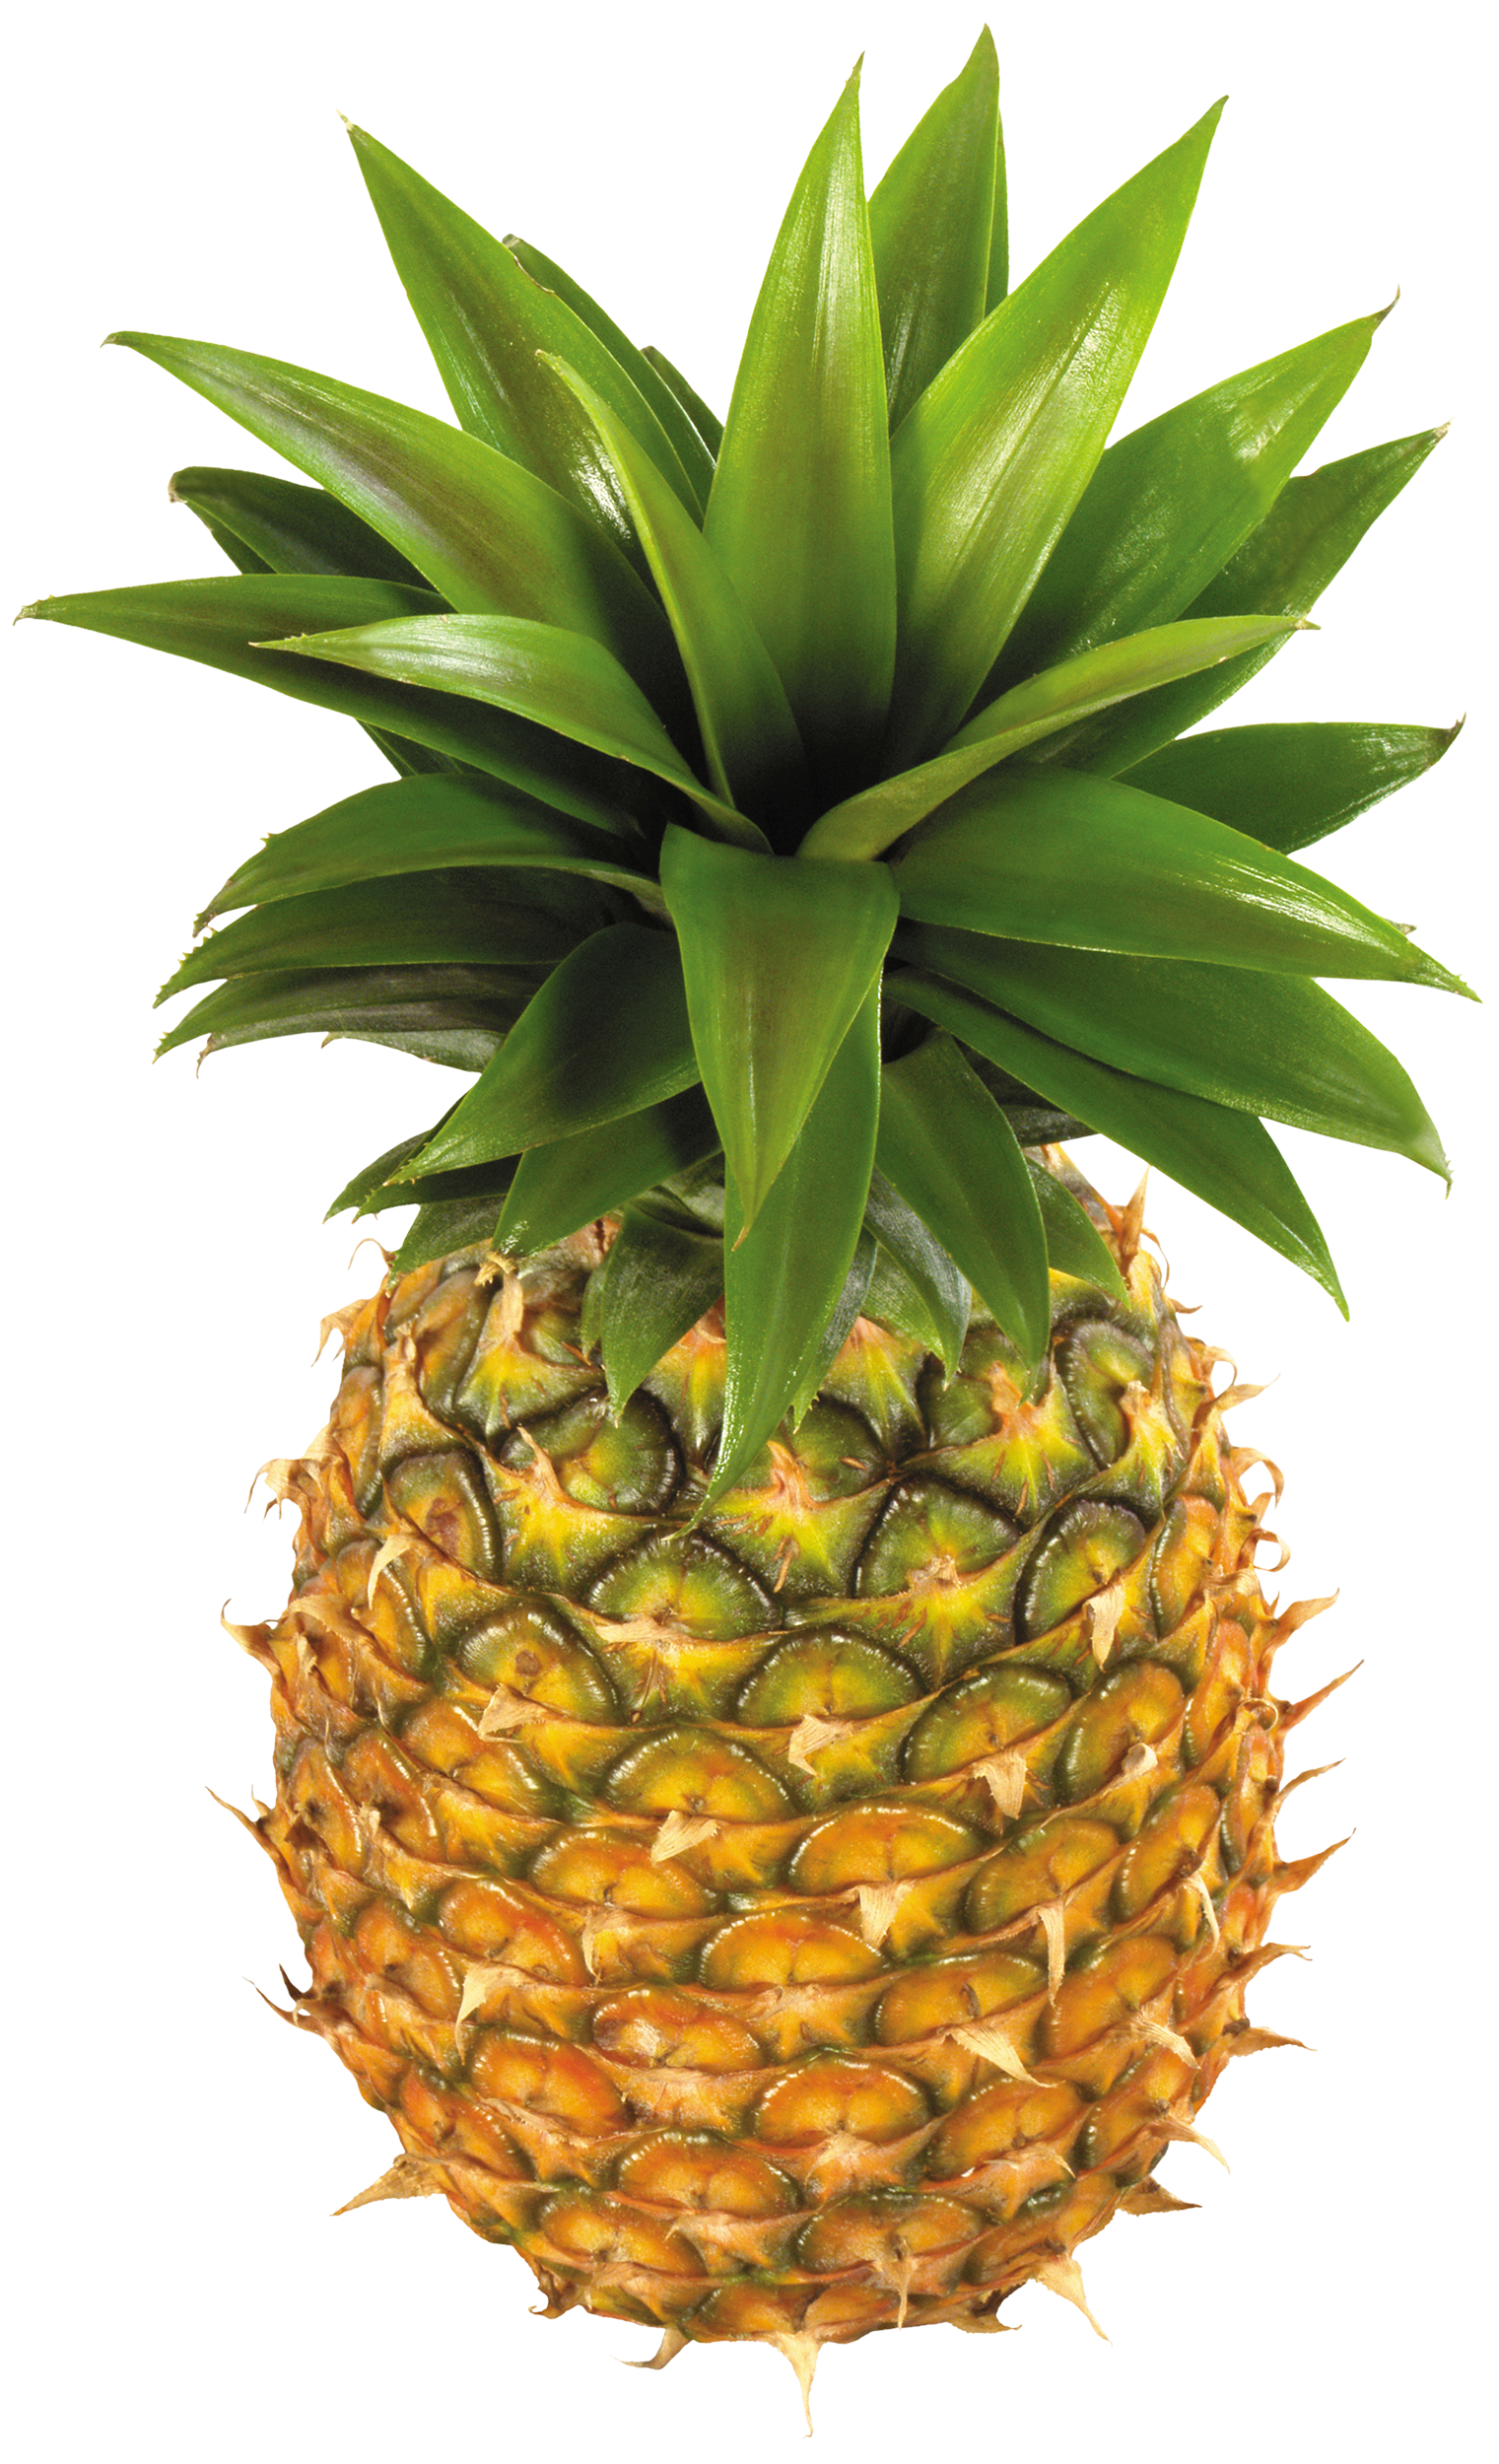 houses clipart pineapple